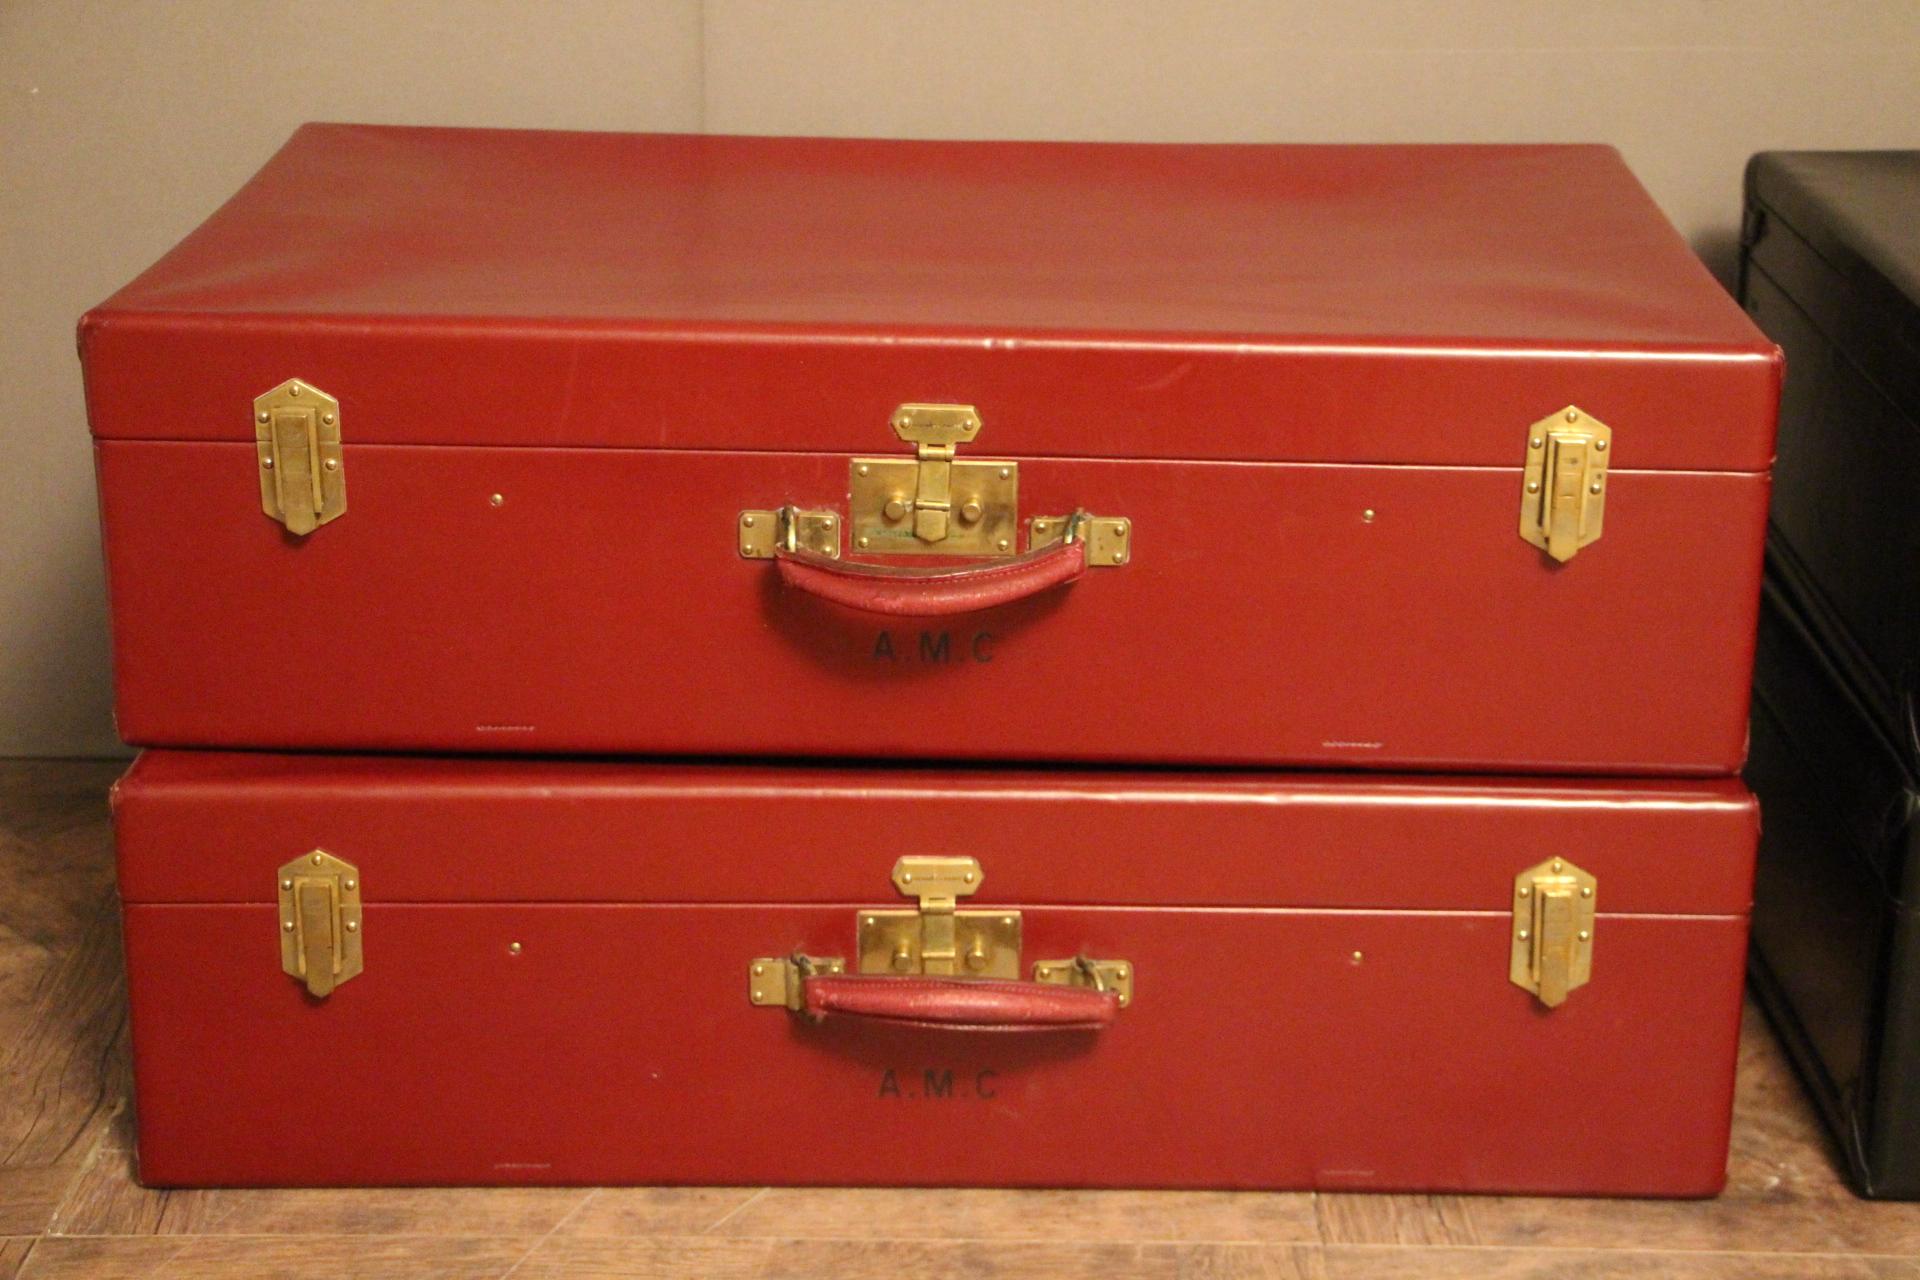 Spectacular set of 4 calf box leather suitcases, 2 black and 2 red ones. They feature one top handle, solid brass hardware, two flip clasp and one pinch lock closure all marked Hermes Paris.
These 4 pieces are in very good condition. There is